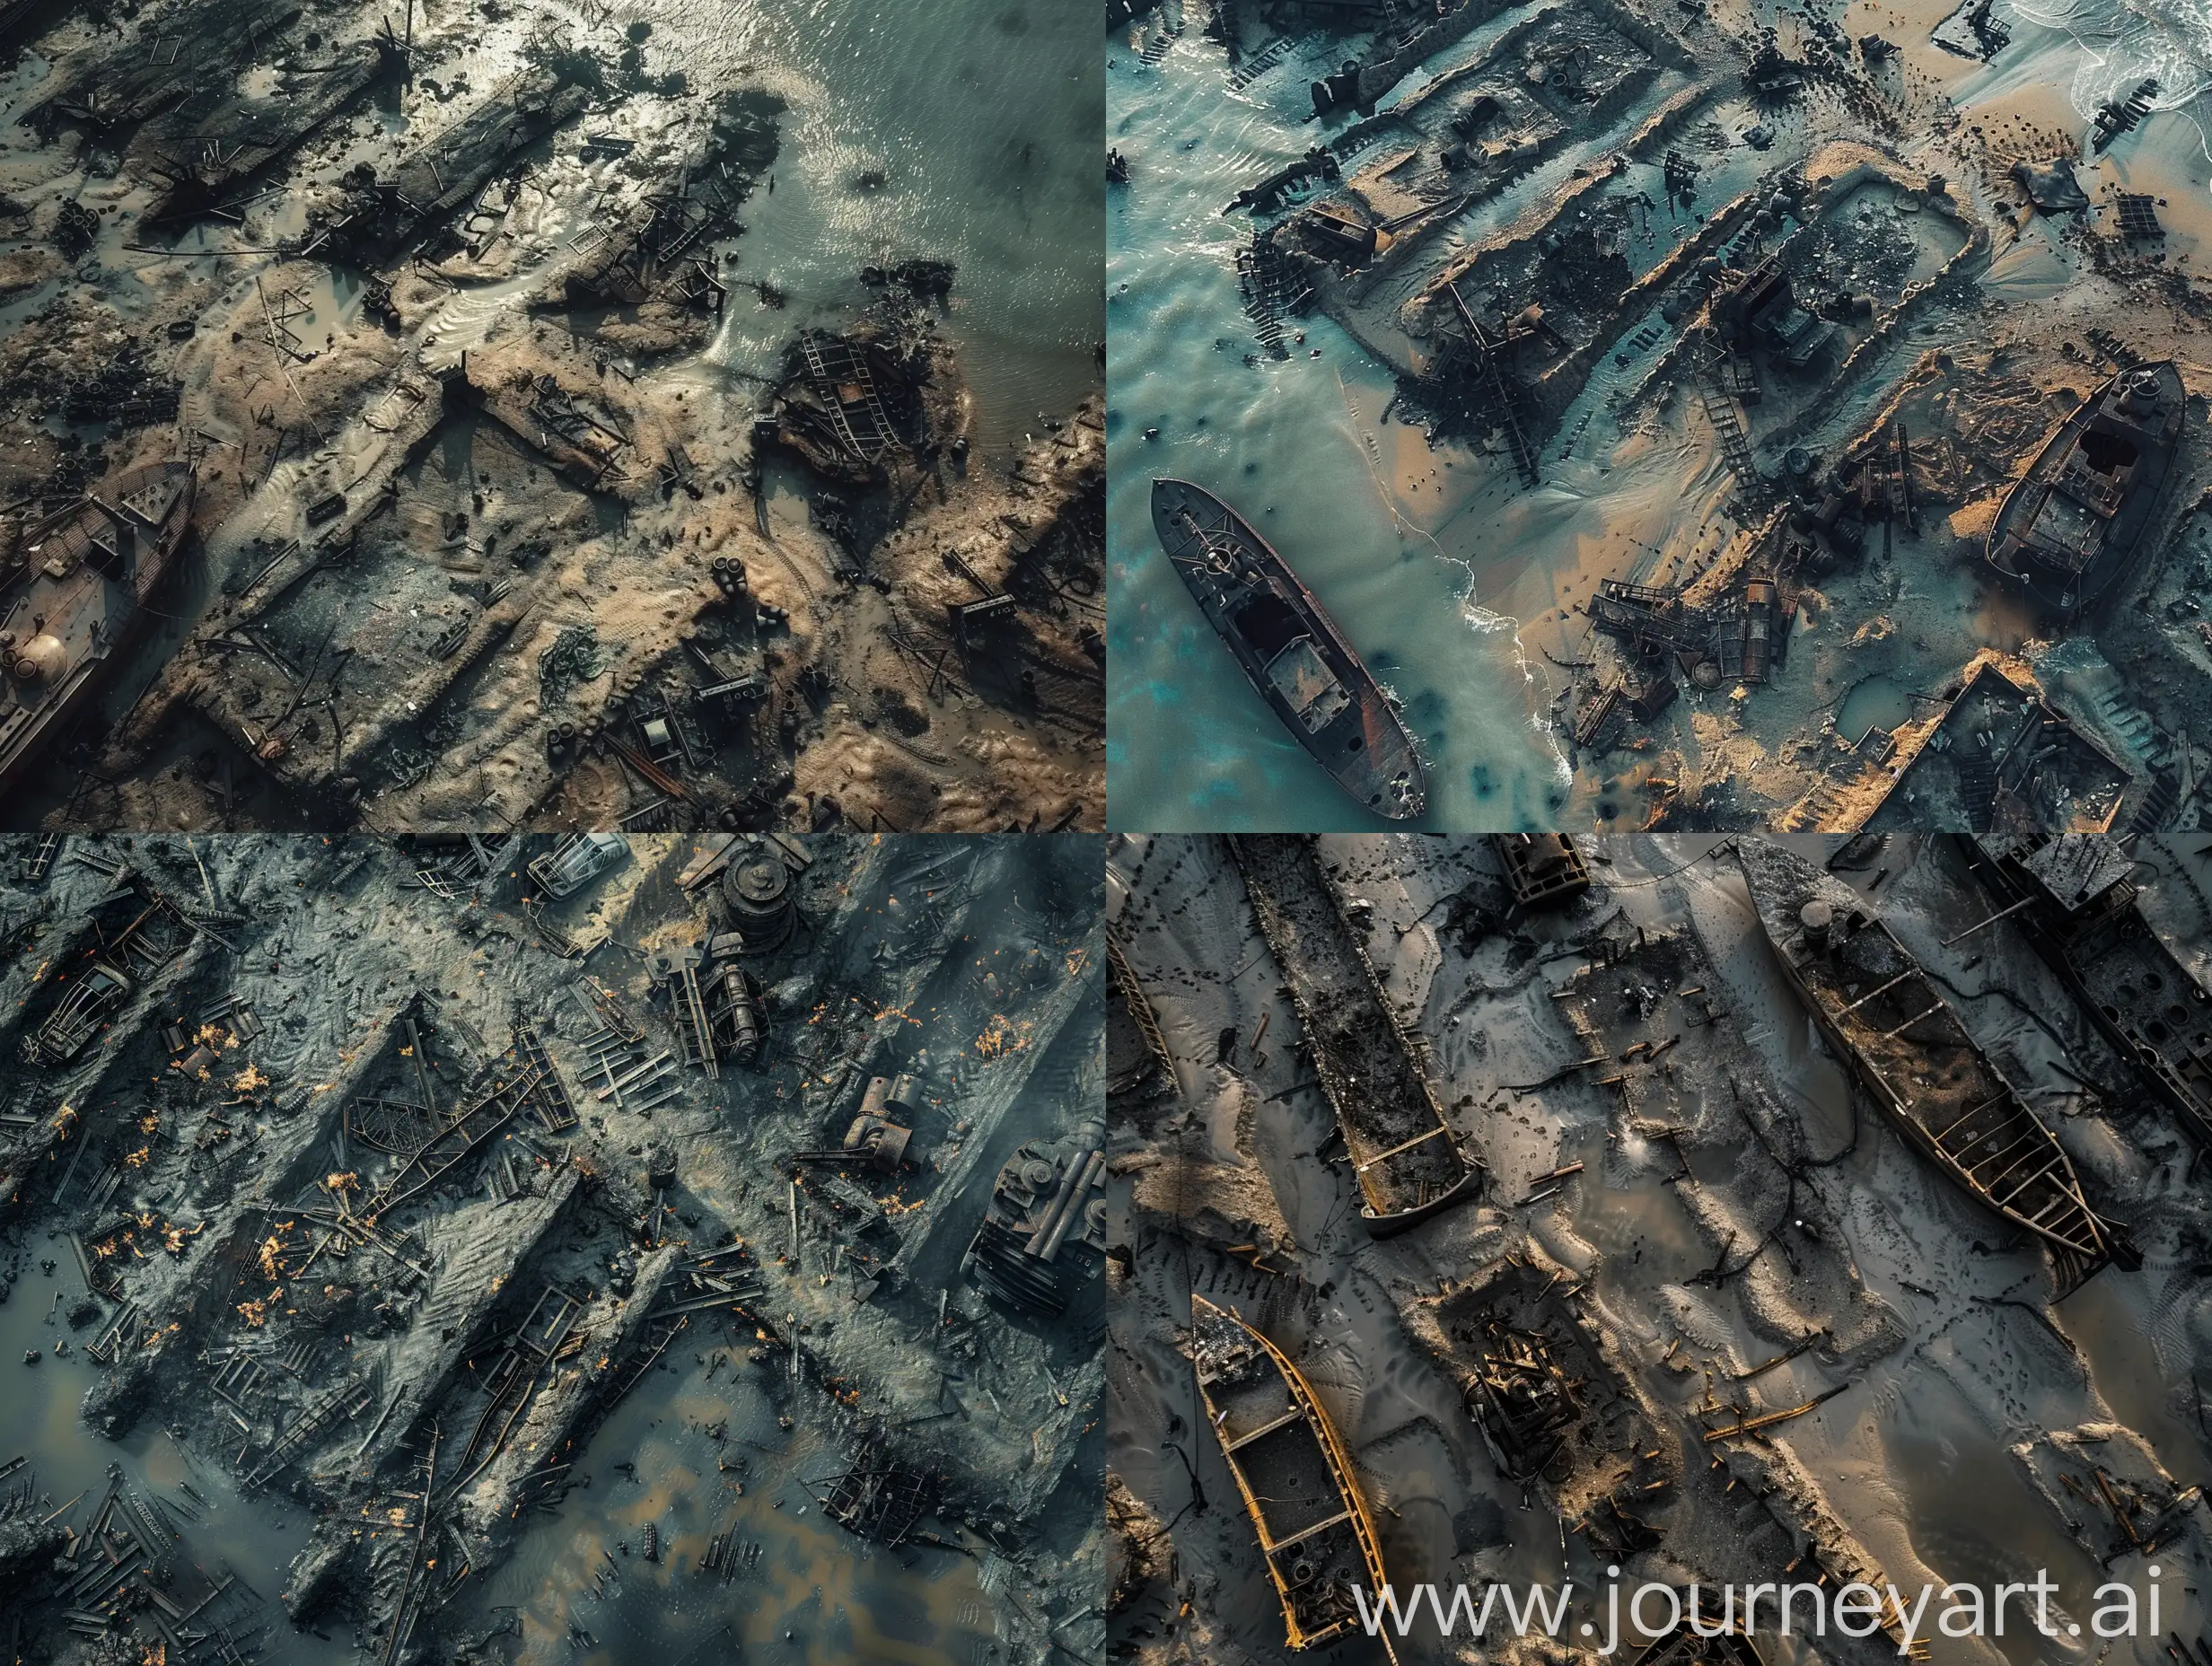 Desolate-Battlefield-aftermath-Abandoned-Trenches-and-Scorched-Equipment